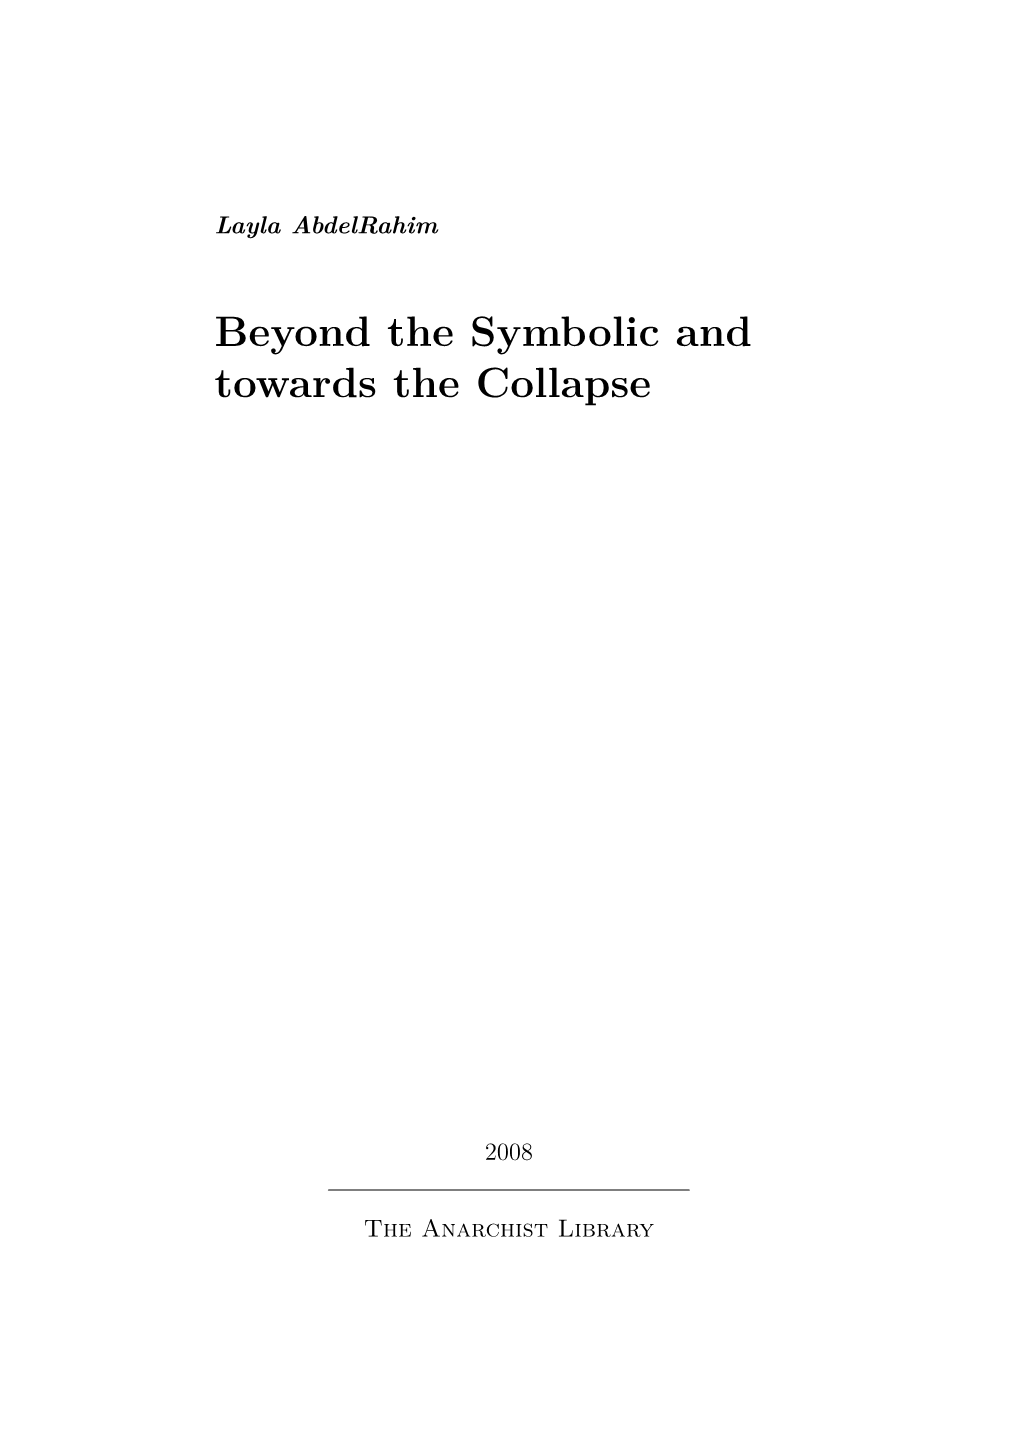 Beyond the Symbolic and Towards the Collapse